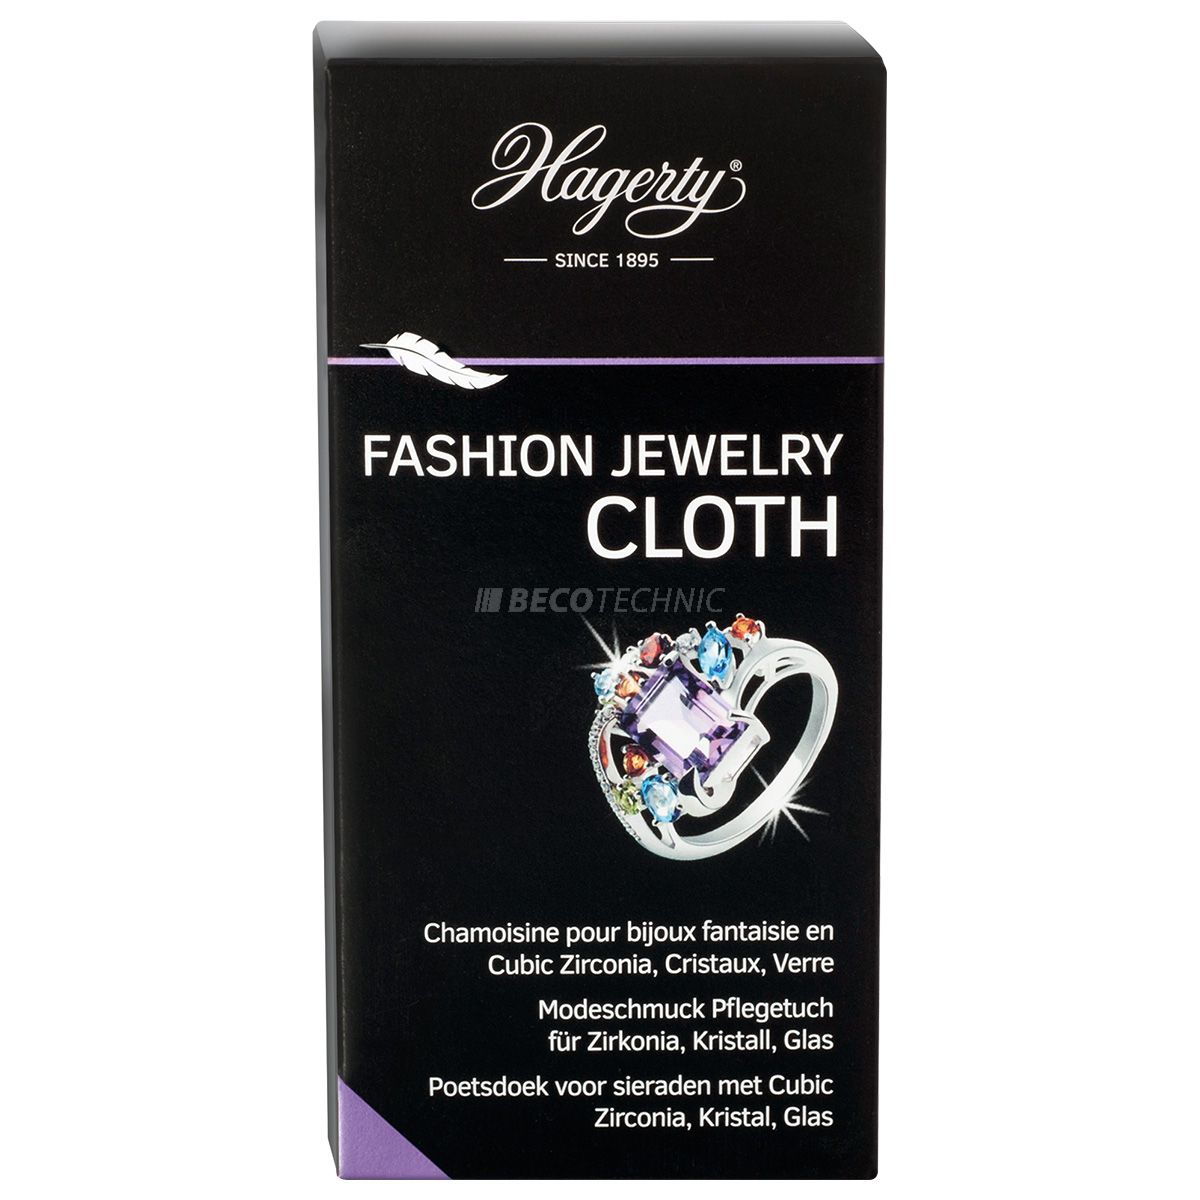 Hagerty Fashion Jewelry Cloth, care cloth for costume jewelry, 36 x 30 cm